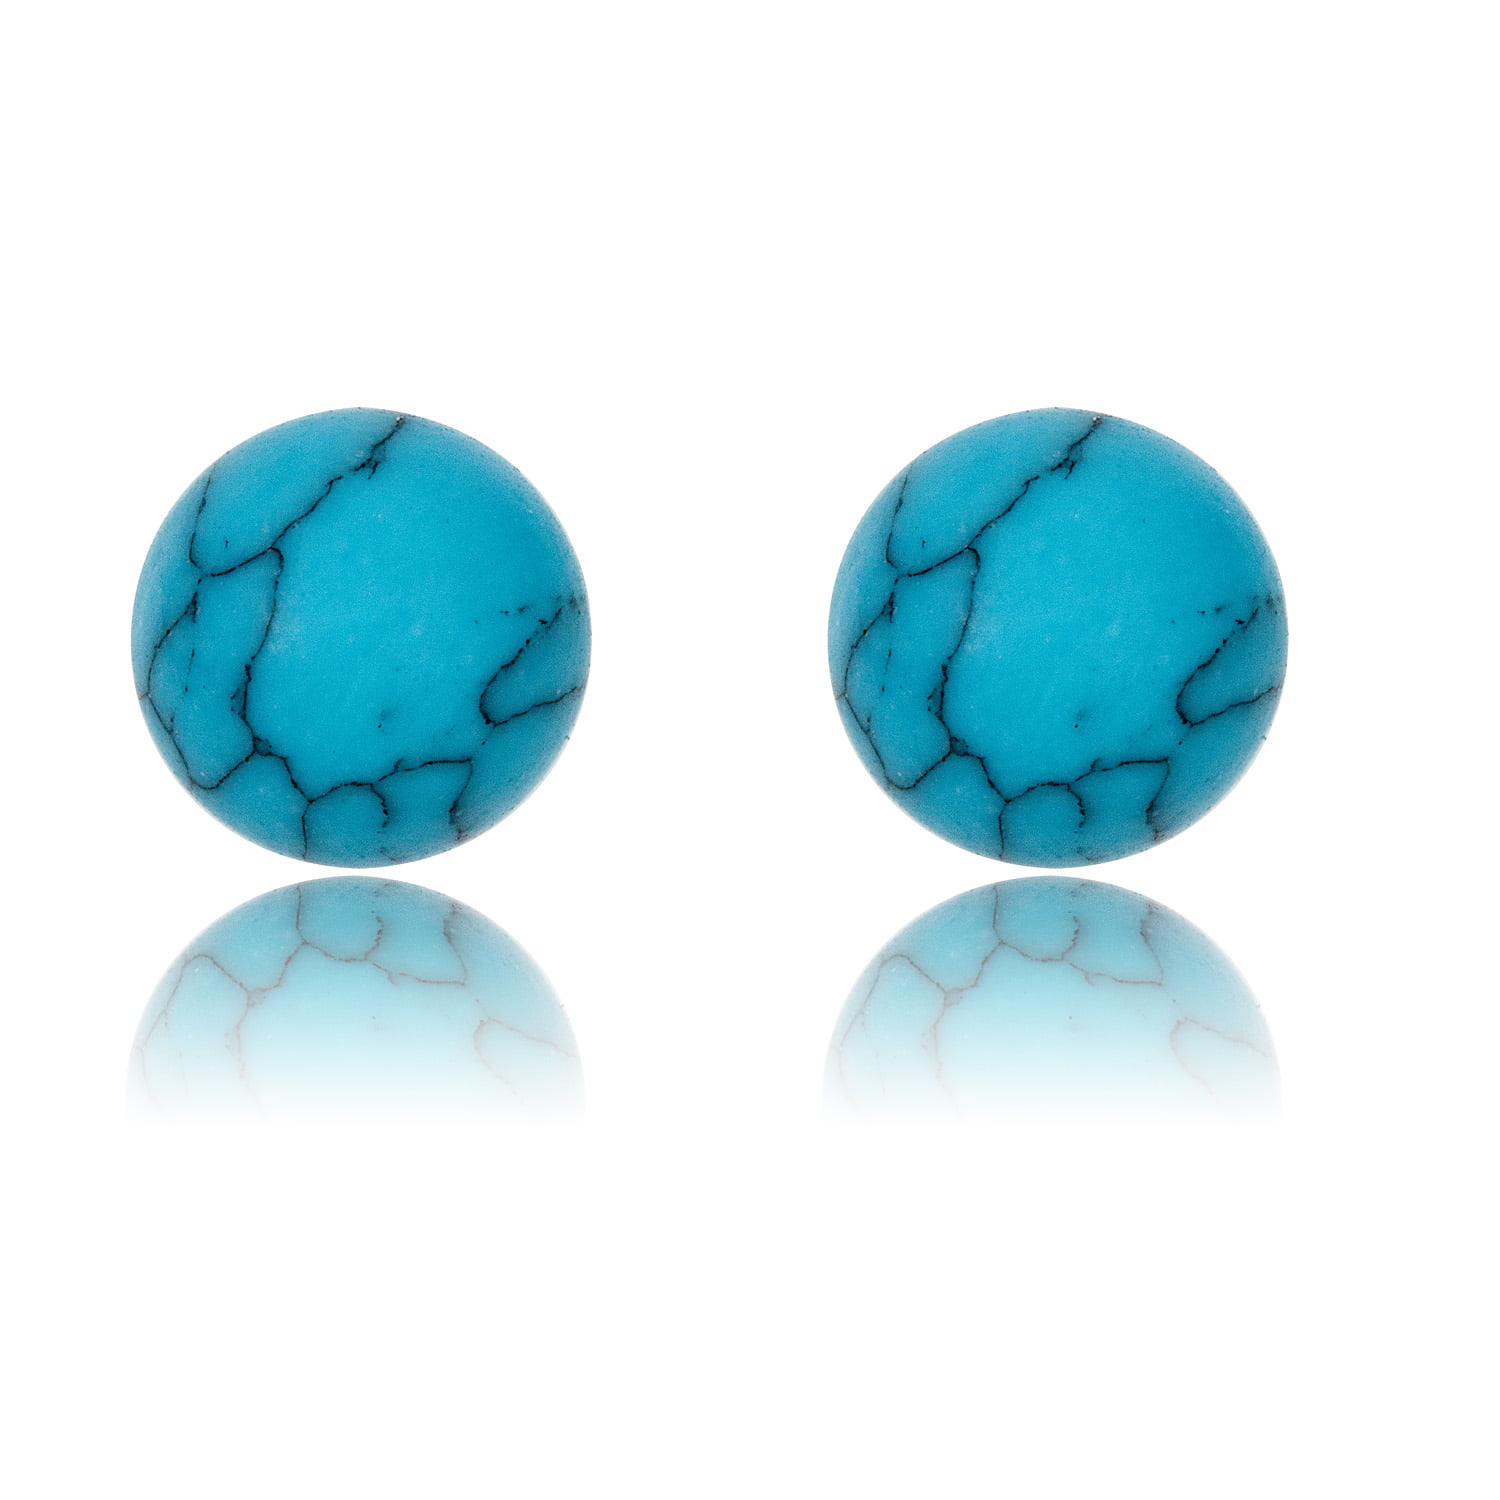 Synthetic Turquoise Earring Studs-Handmade Stainless Steel Post